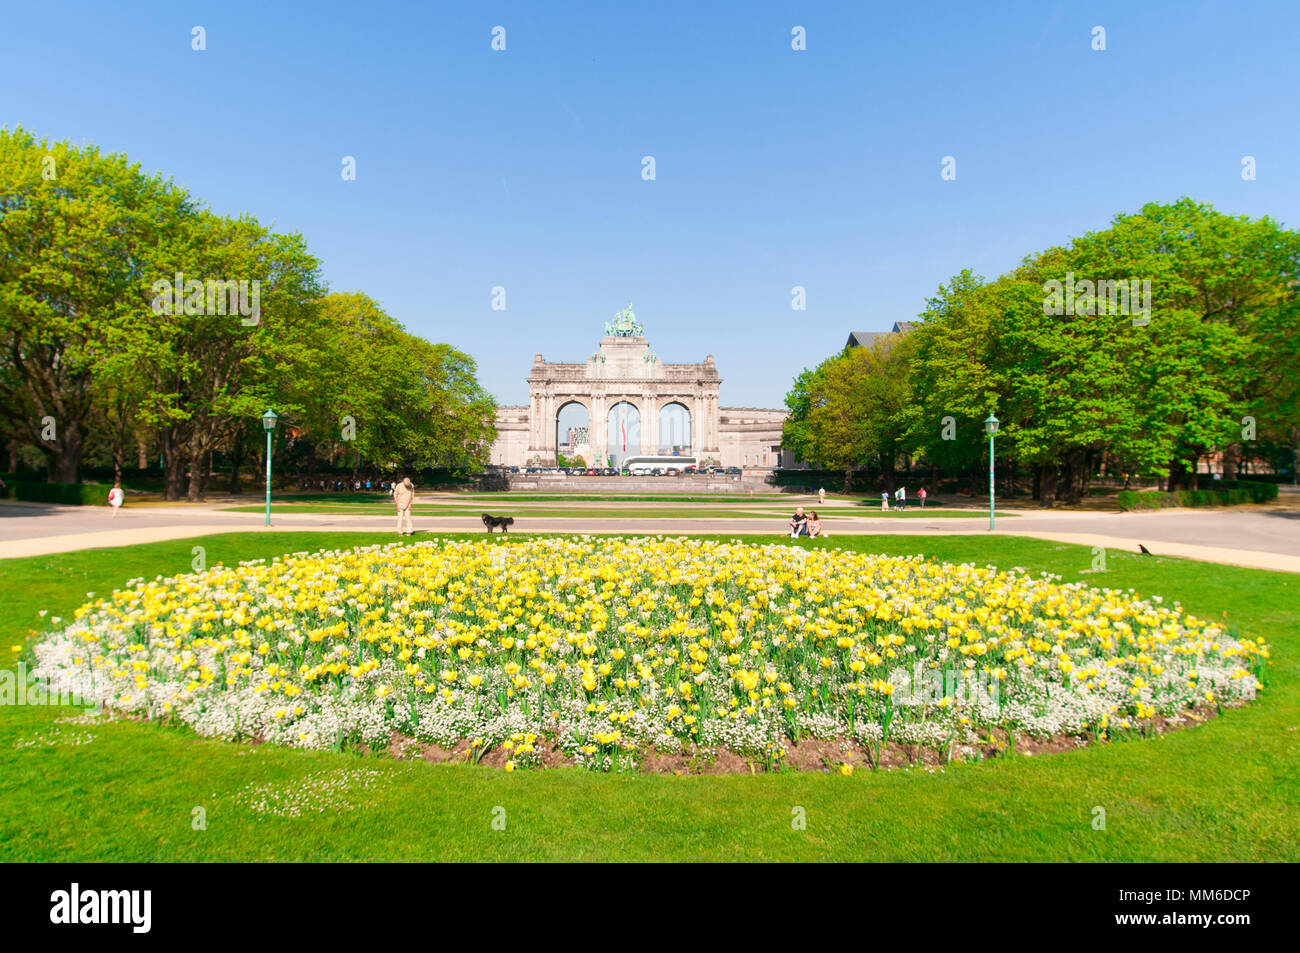 Triumphal arch at the Parc du Cinquantenaire / Jubelpark in Brussels, Belgium. April 2018. With flower bed in front. Stock Photo